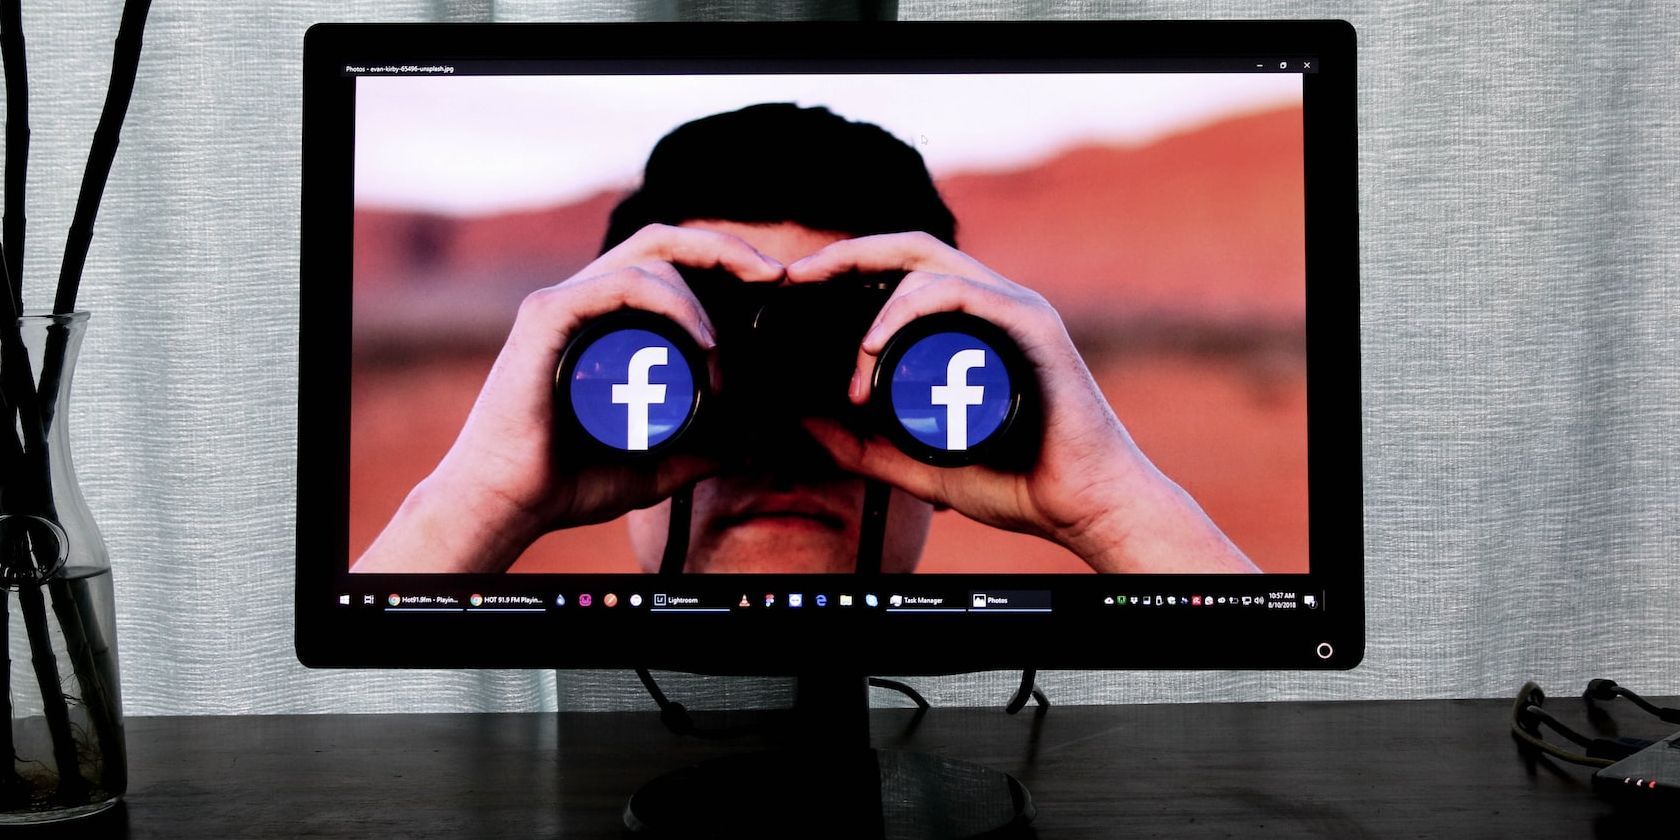 Desktop Monitor Placed on a Table Showing Image of a Man Viewing From a Binocular Covered With Facebook Logo Icons